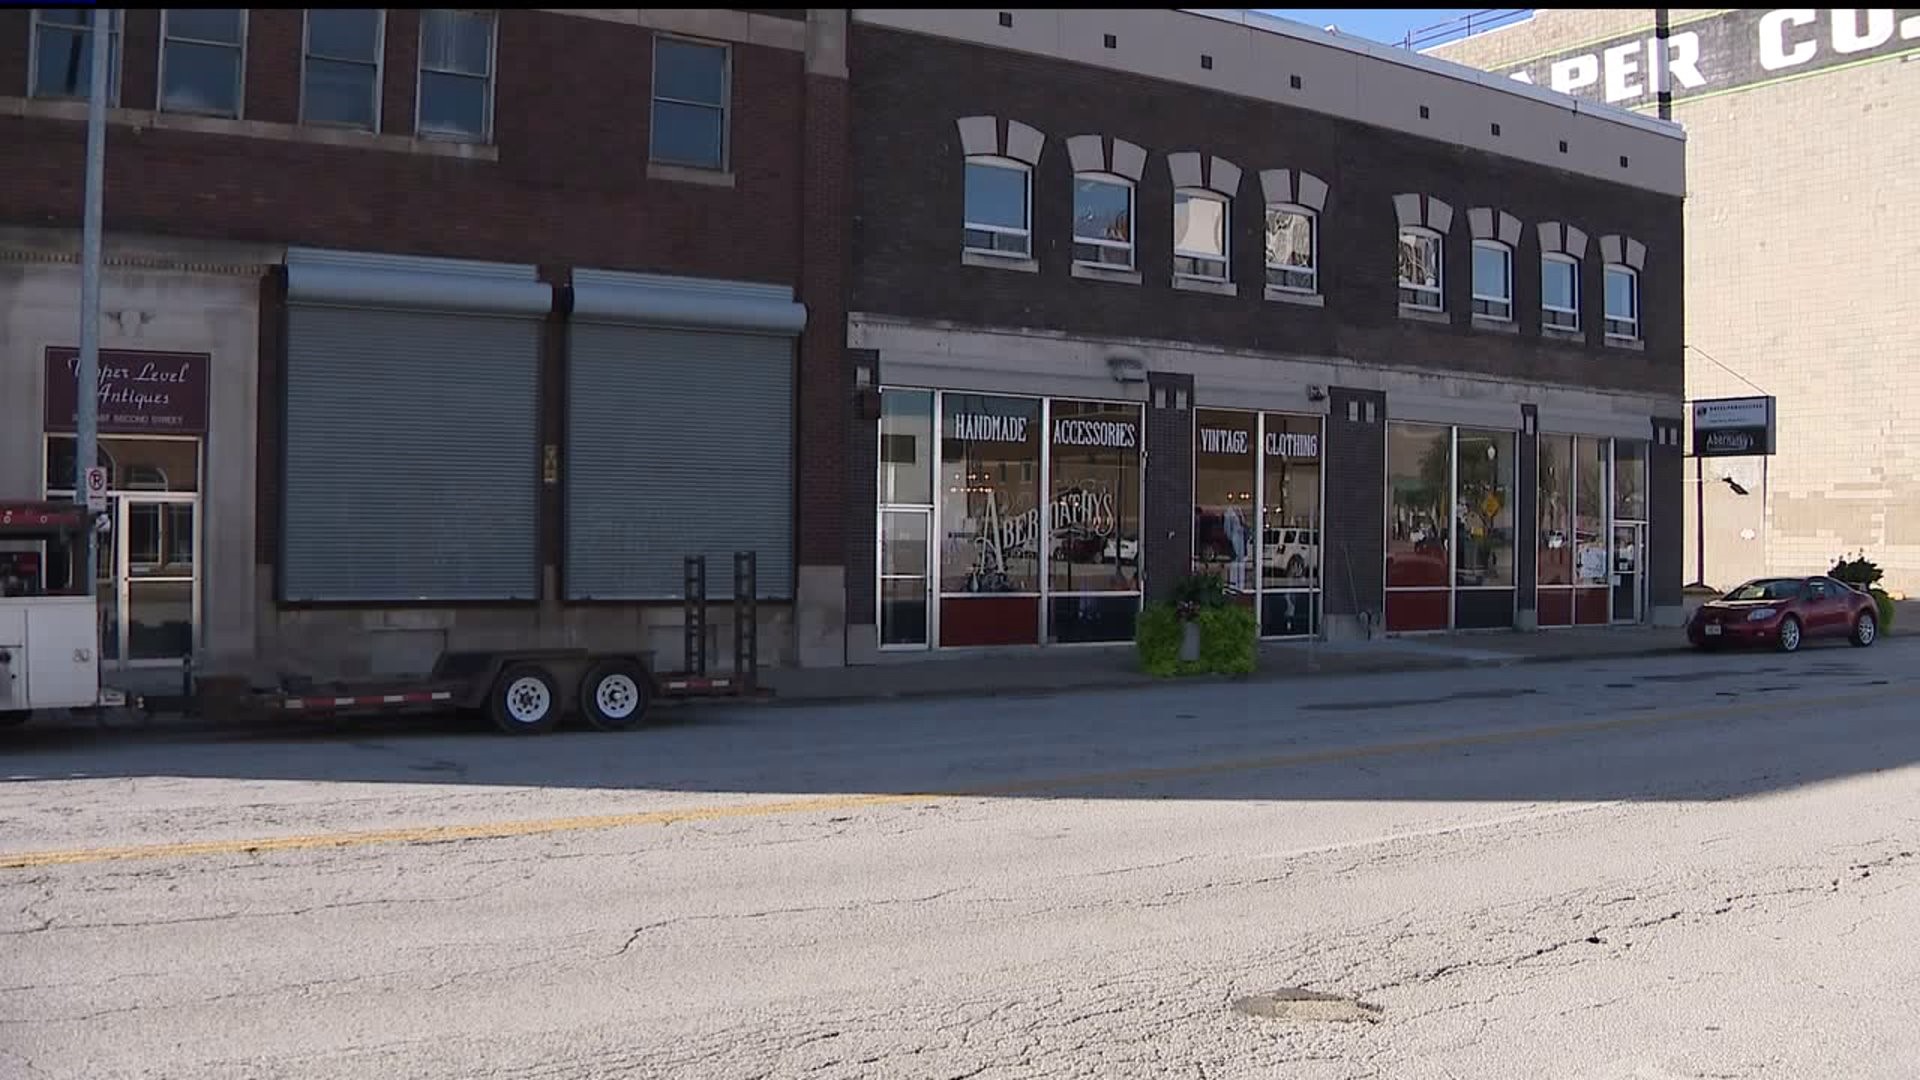 Business owners react to shooting in downtown Davenport